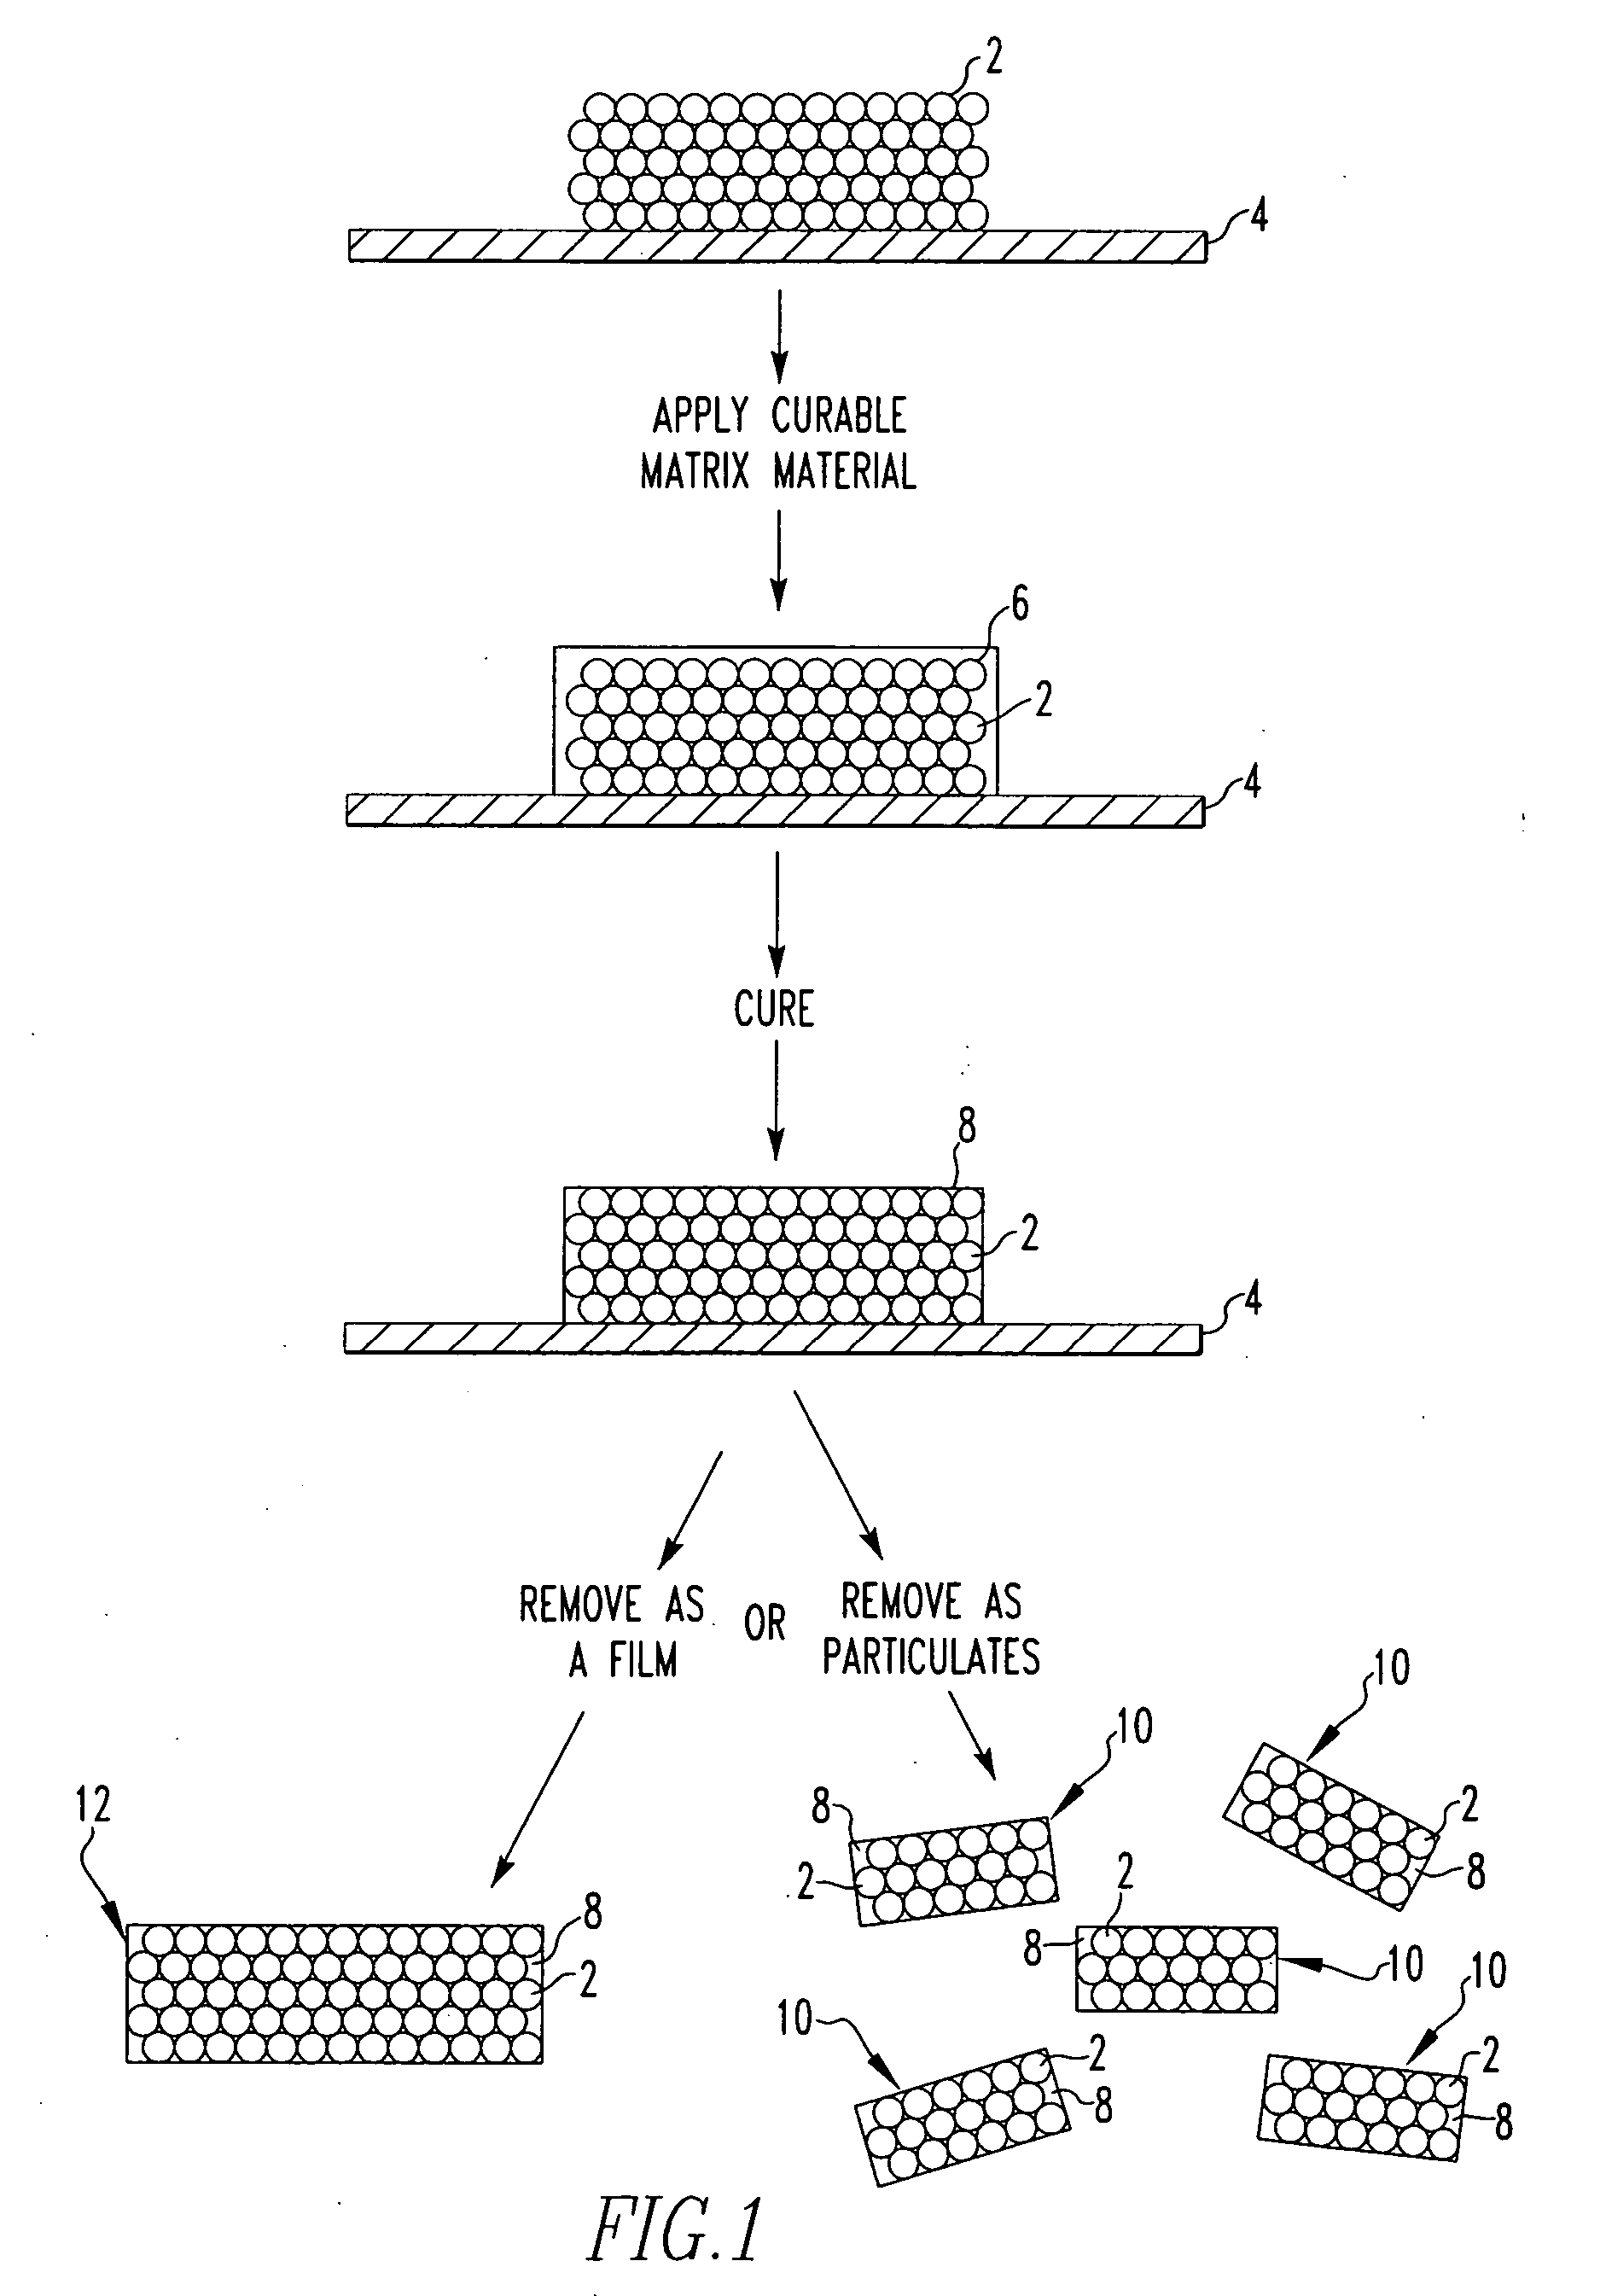 Bragg diffracting security markers